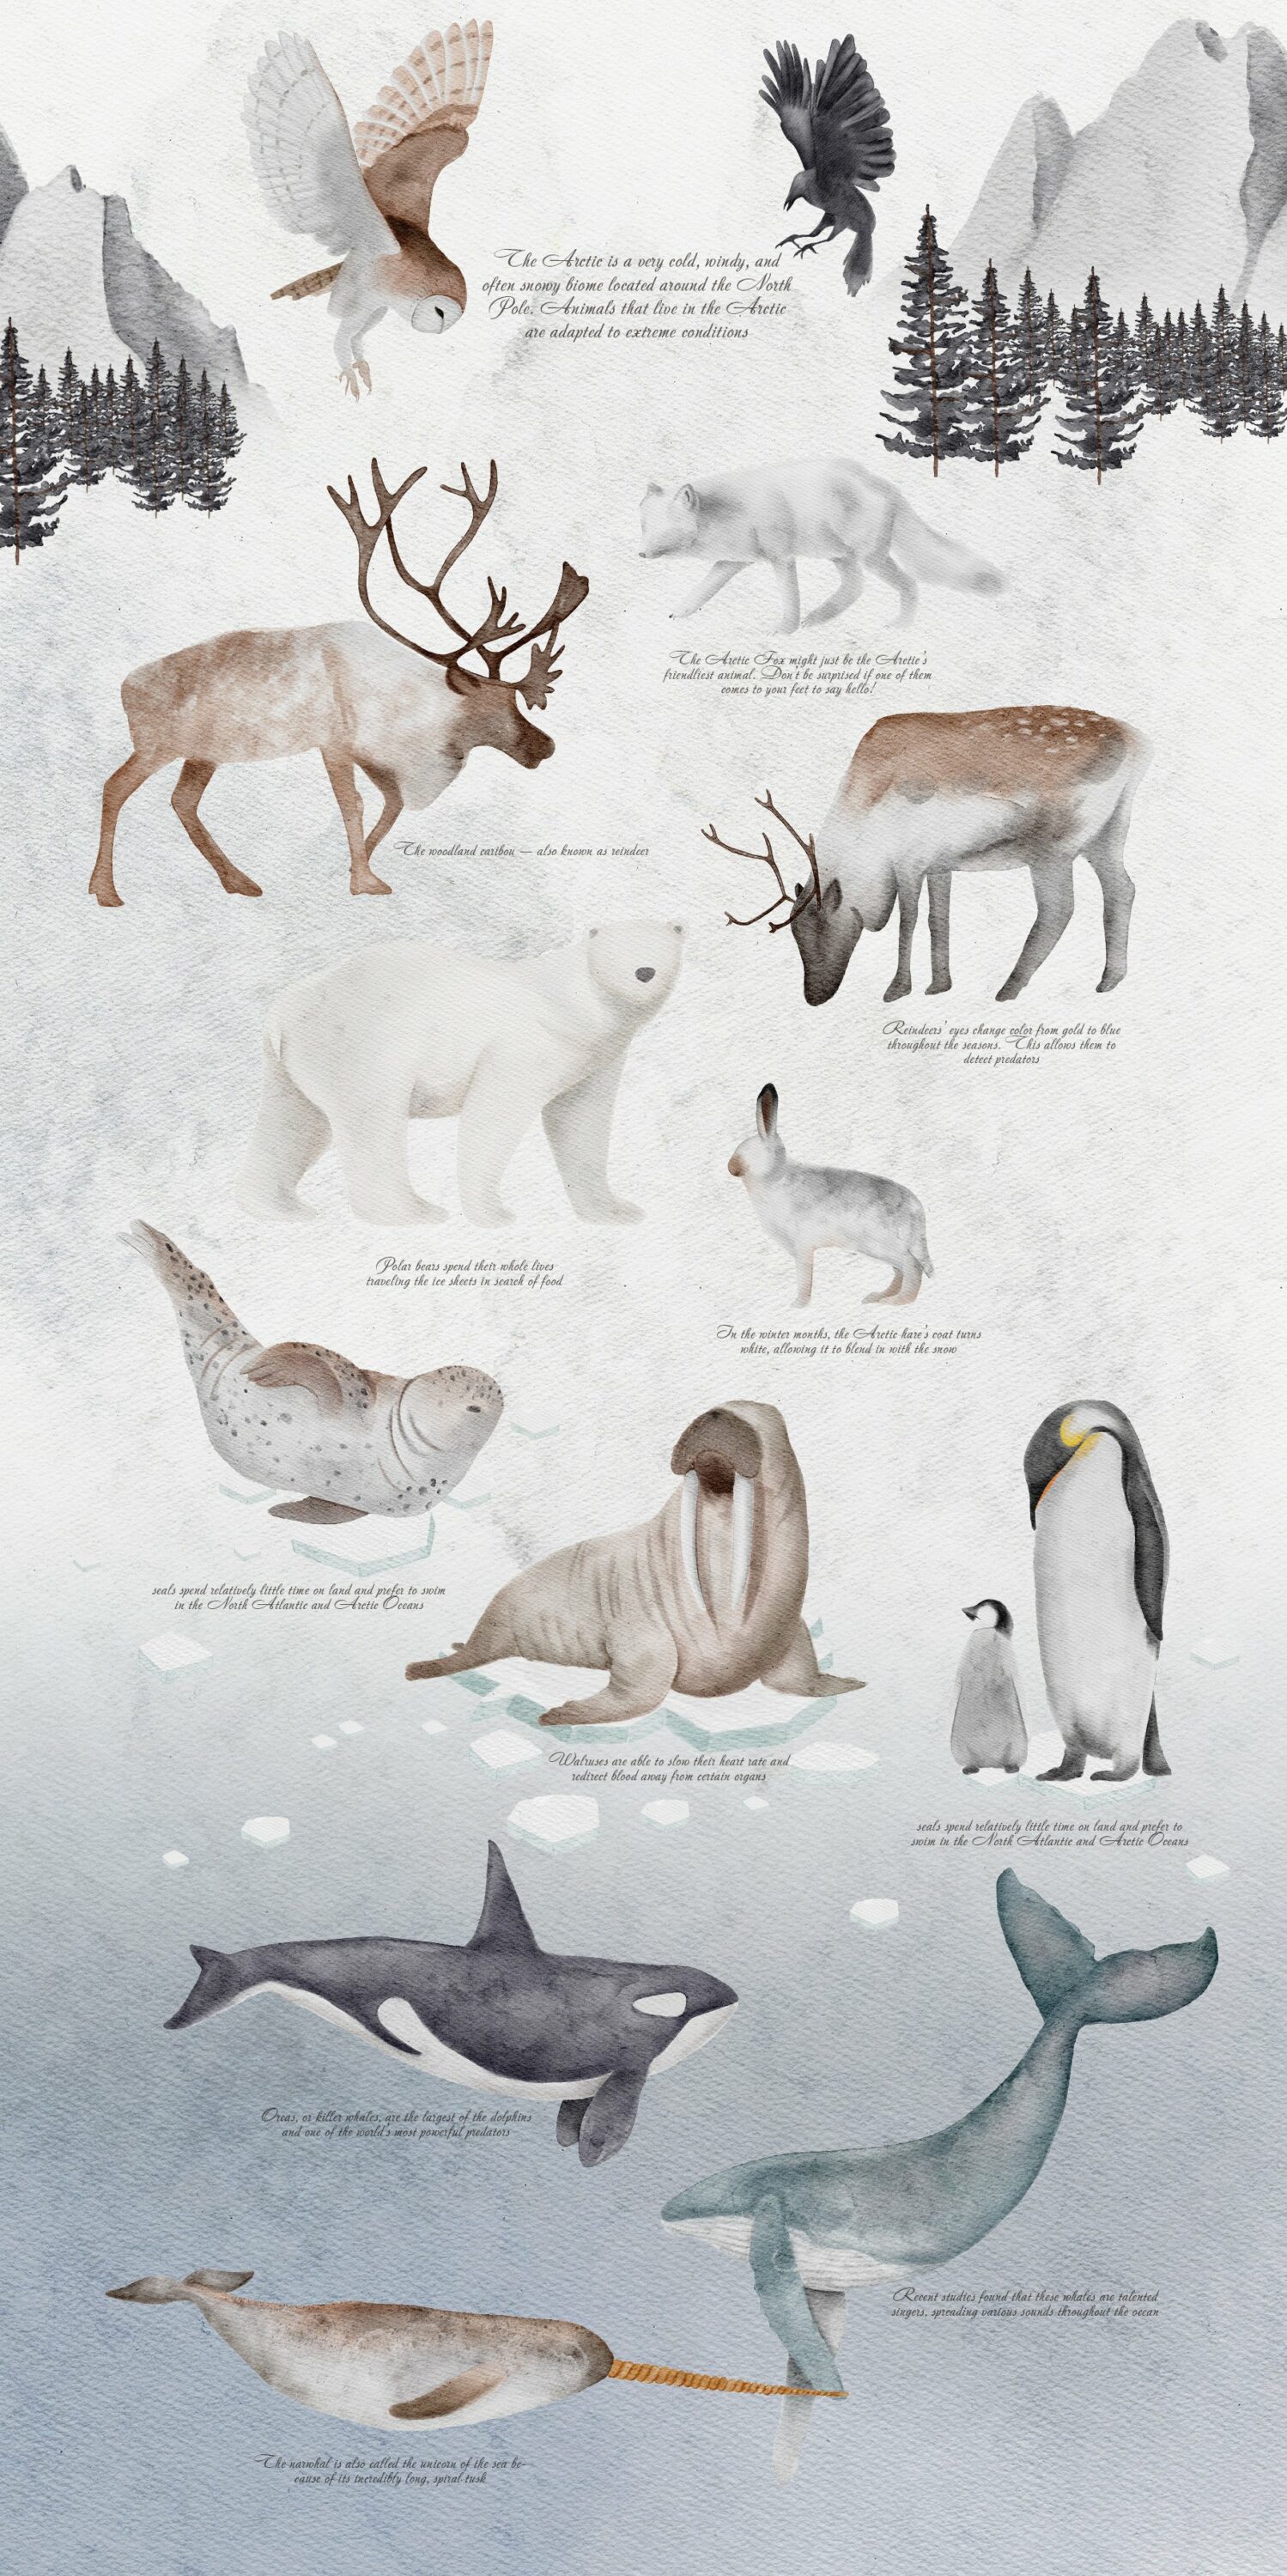 Cool collection of polar animals.